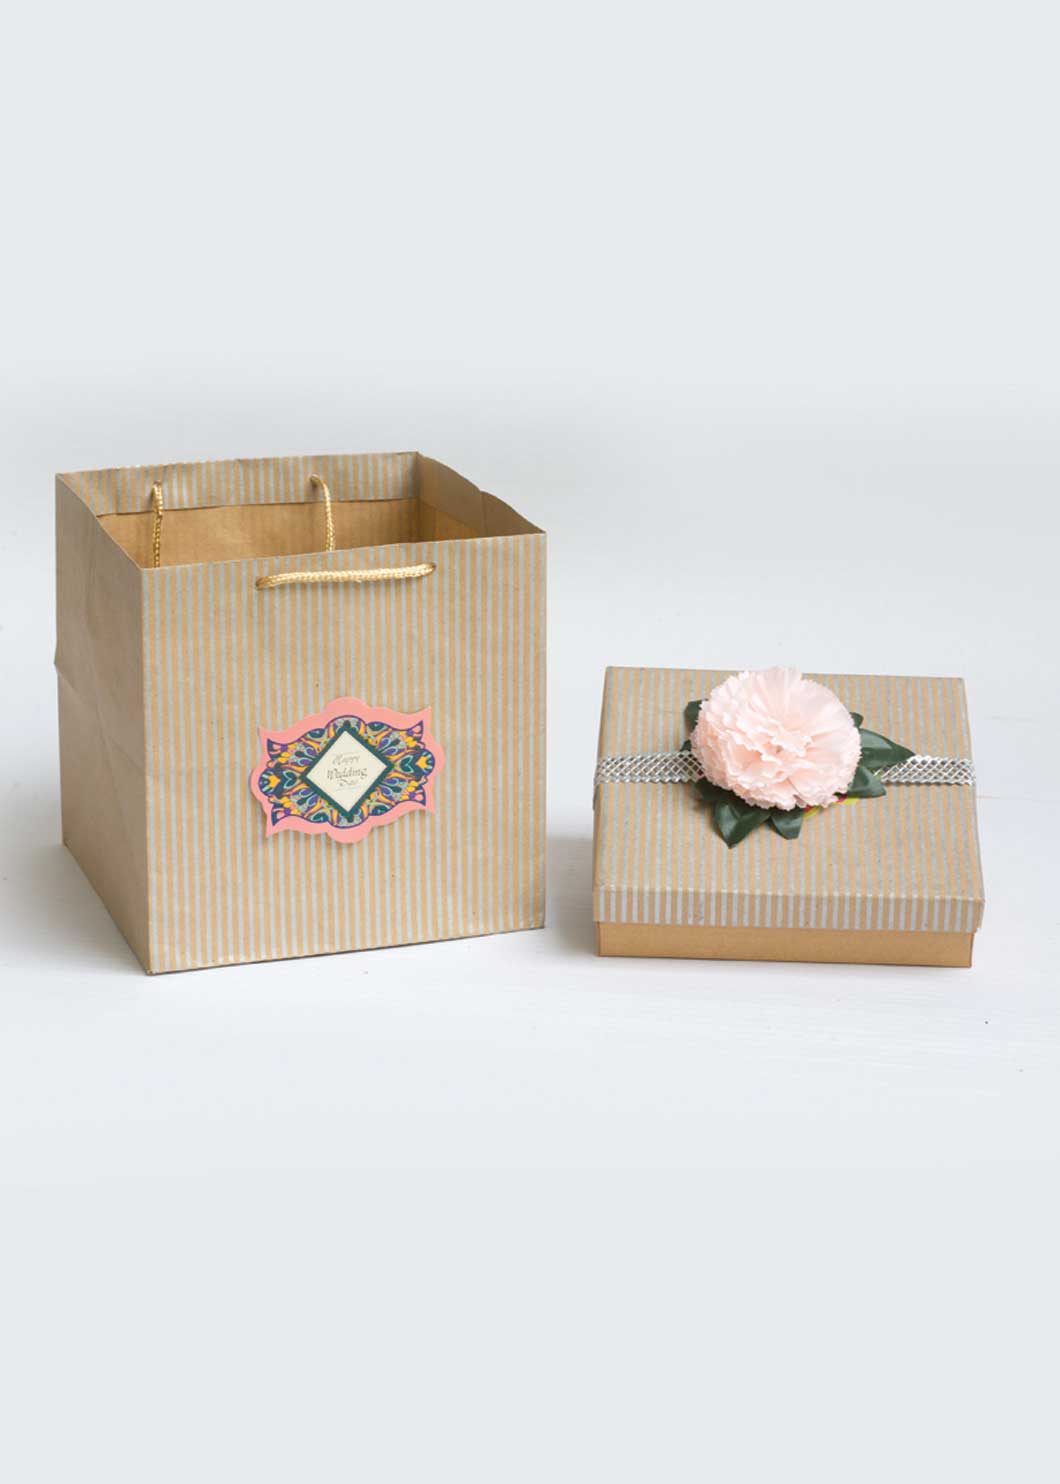 Customized Chocolate Box | Dates Box | Sweet Box | Craft Box | Craft Bags | Clothes Packaging Box | 14 Designs